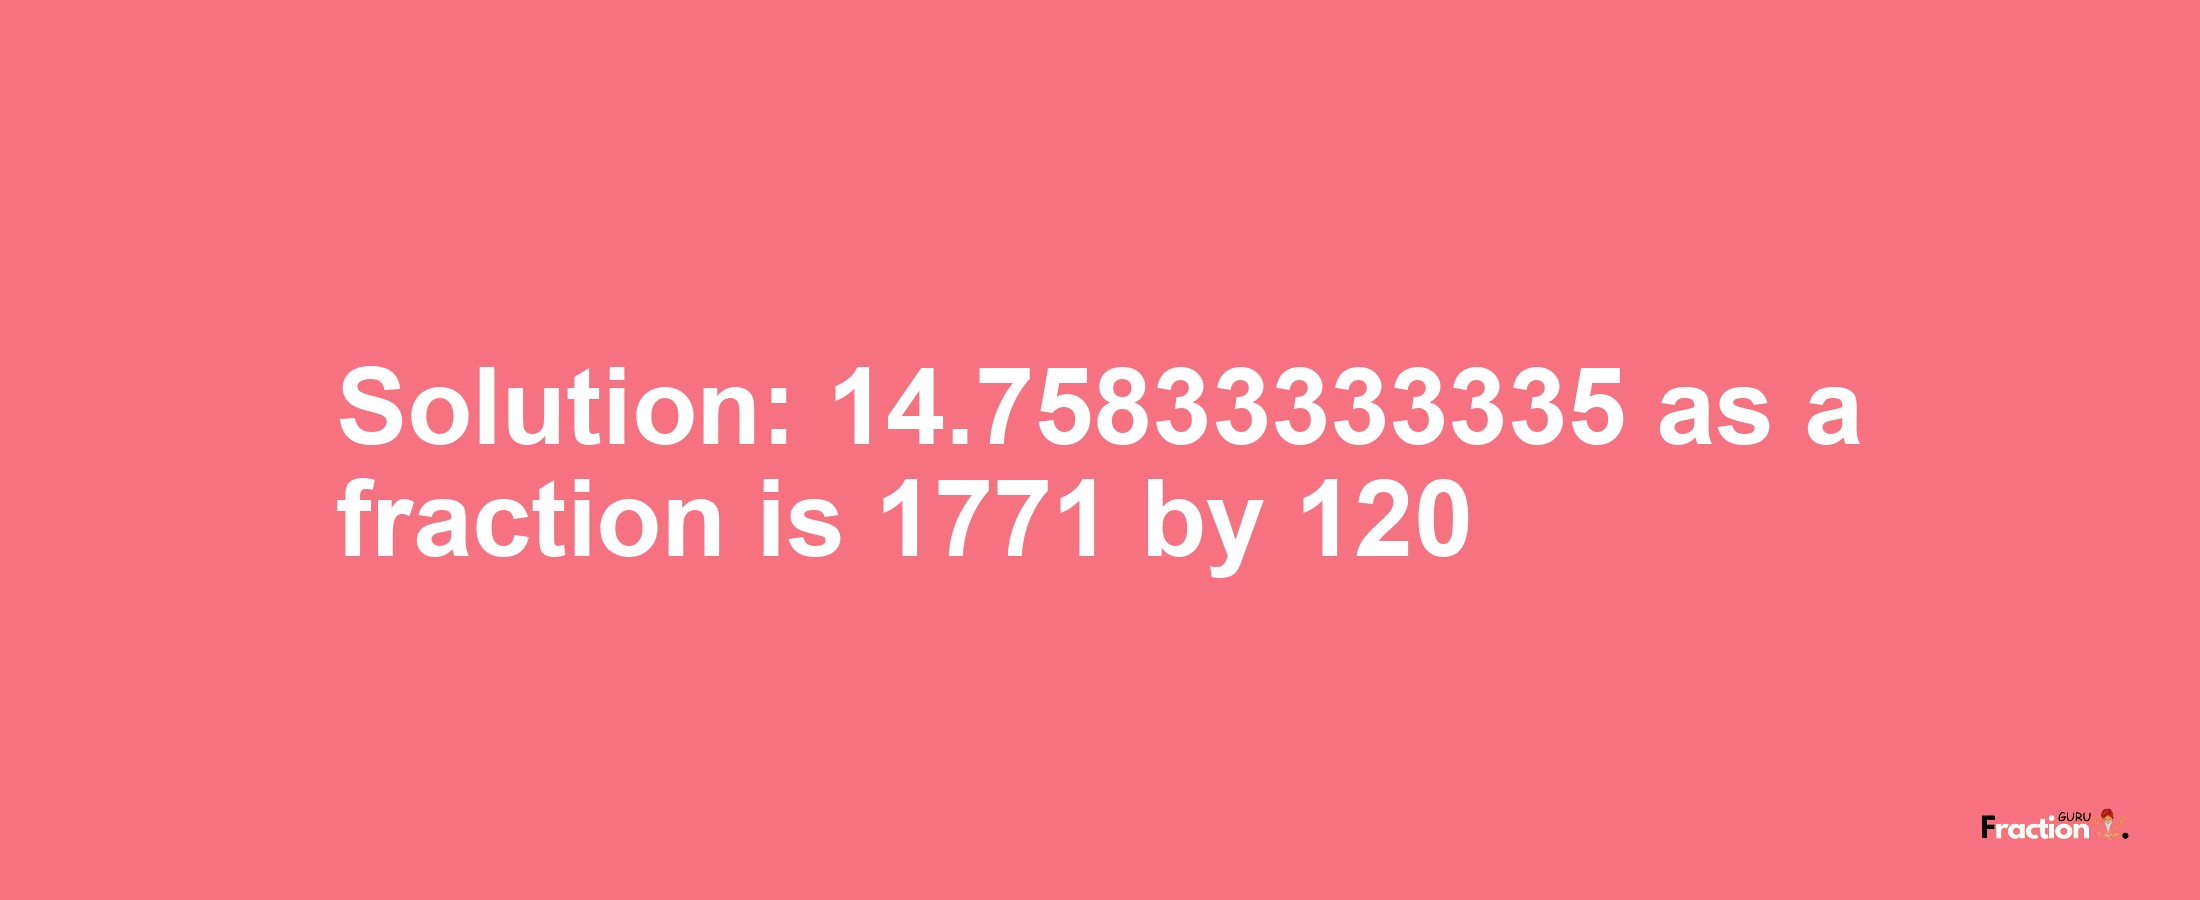 Solution:14.75833333335 as a fraction is 1771/120